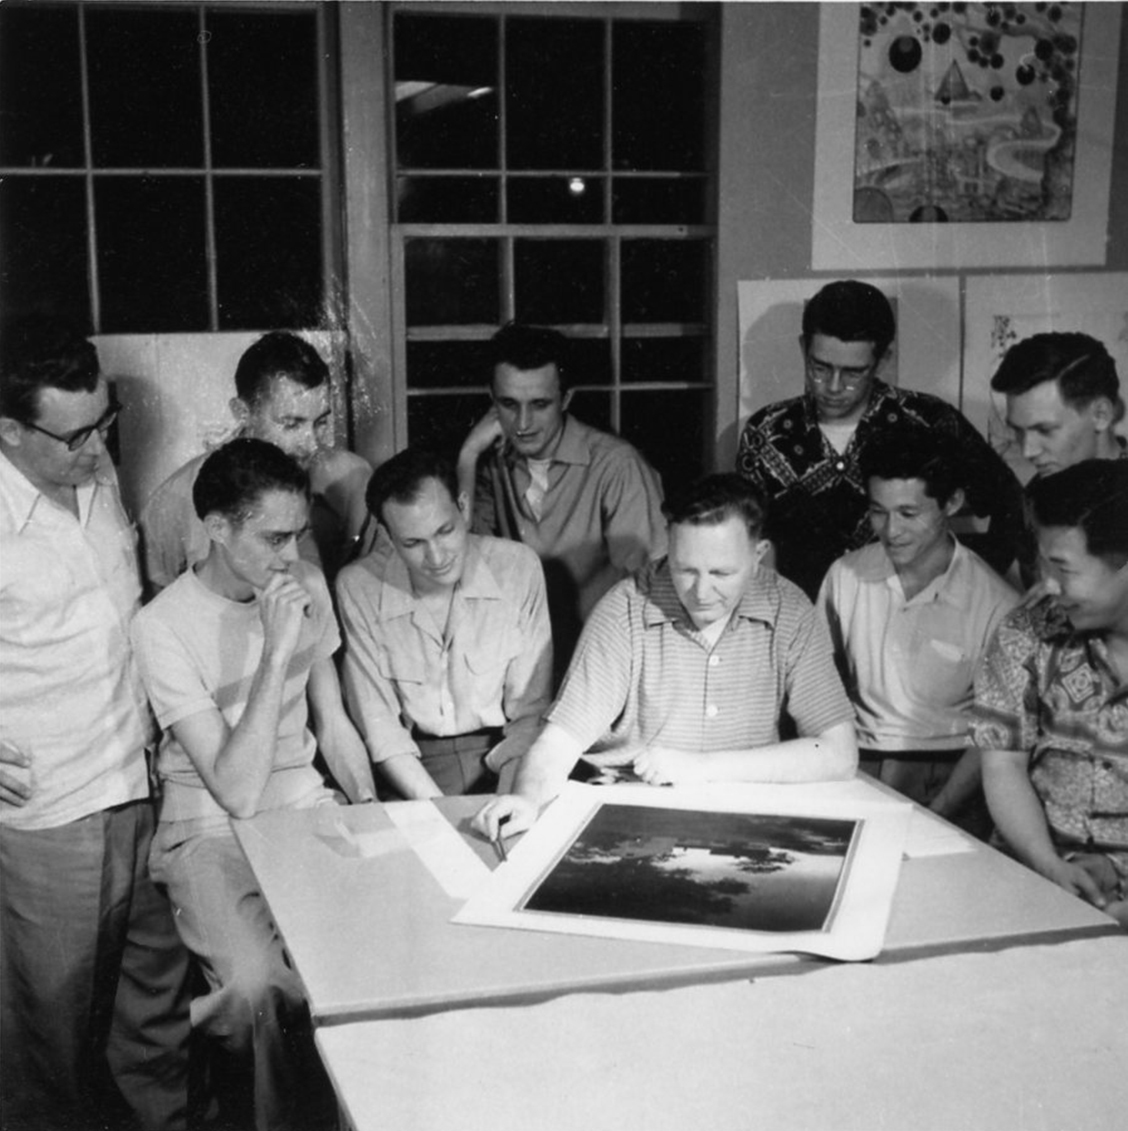 Old photo of Bruce Goff with his architecture students